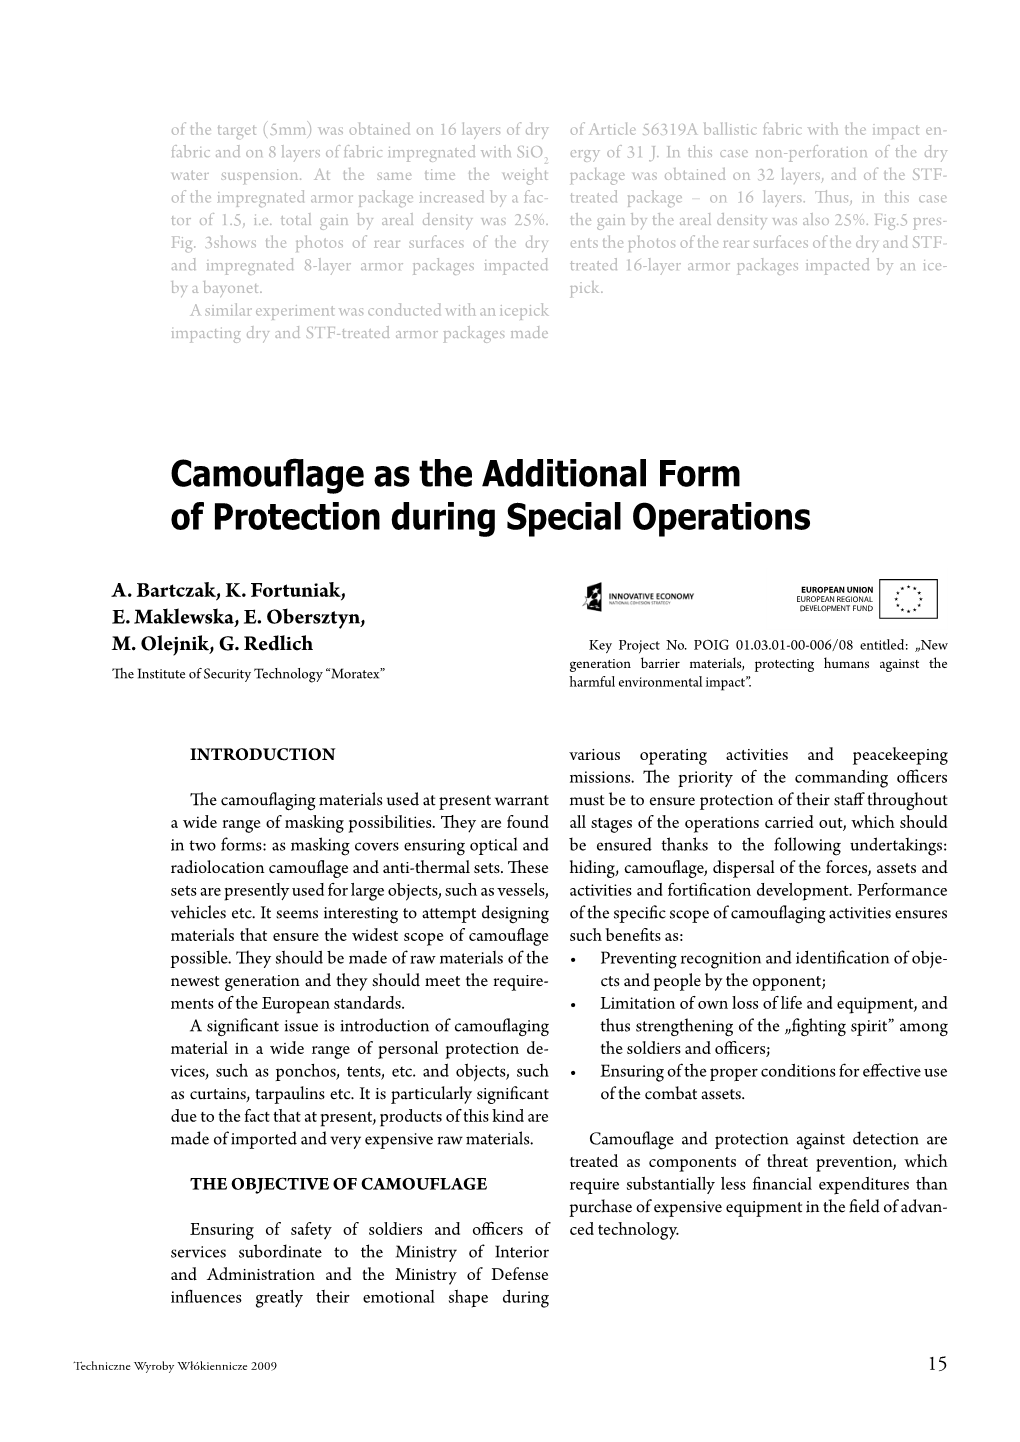 Camouflage As the Additional Form of Protection During Special Operations